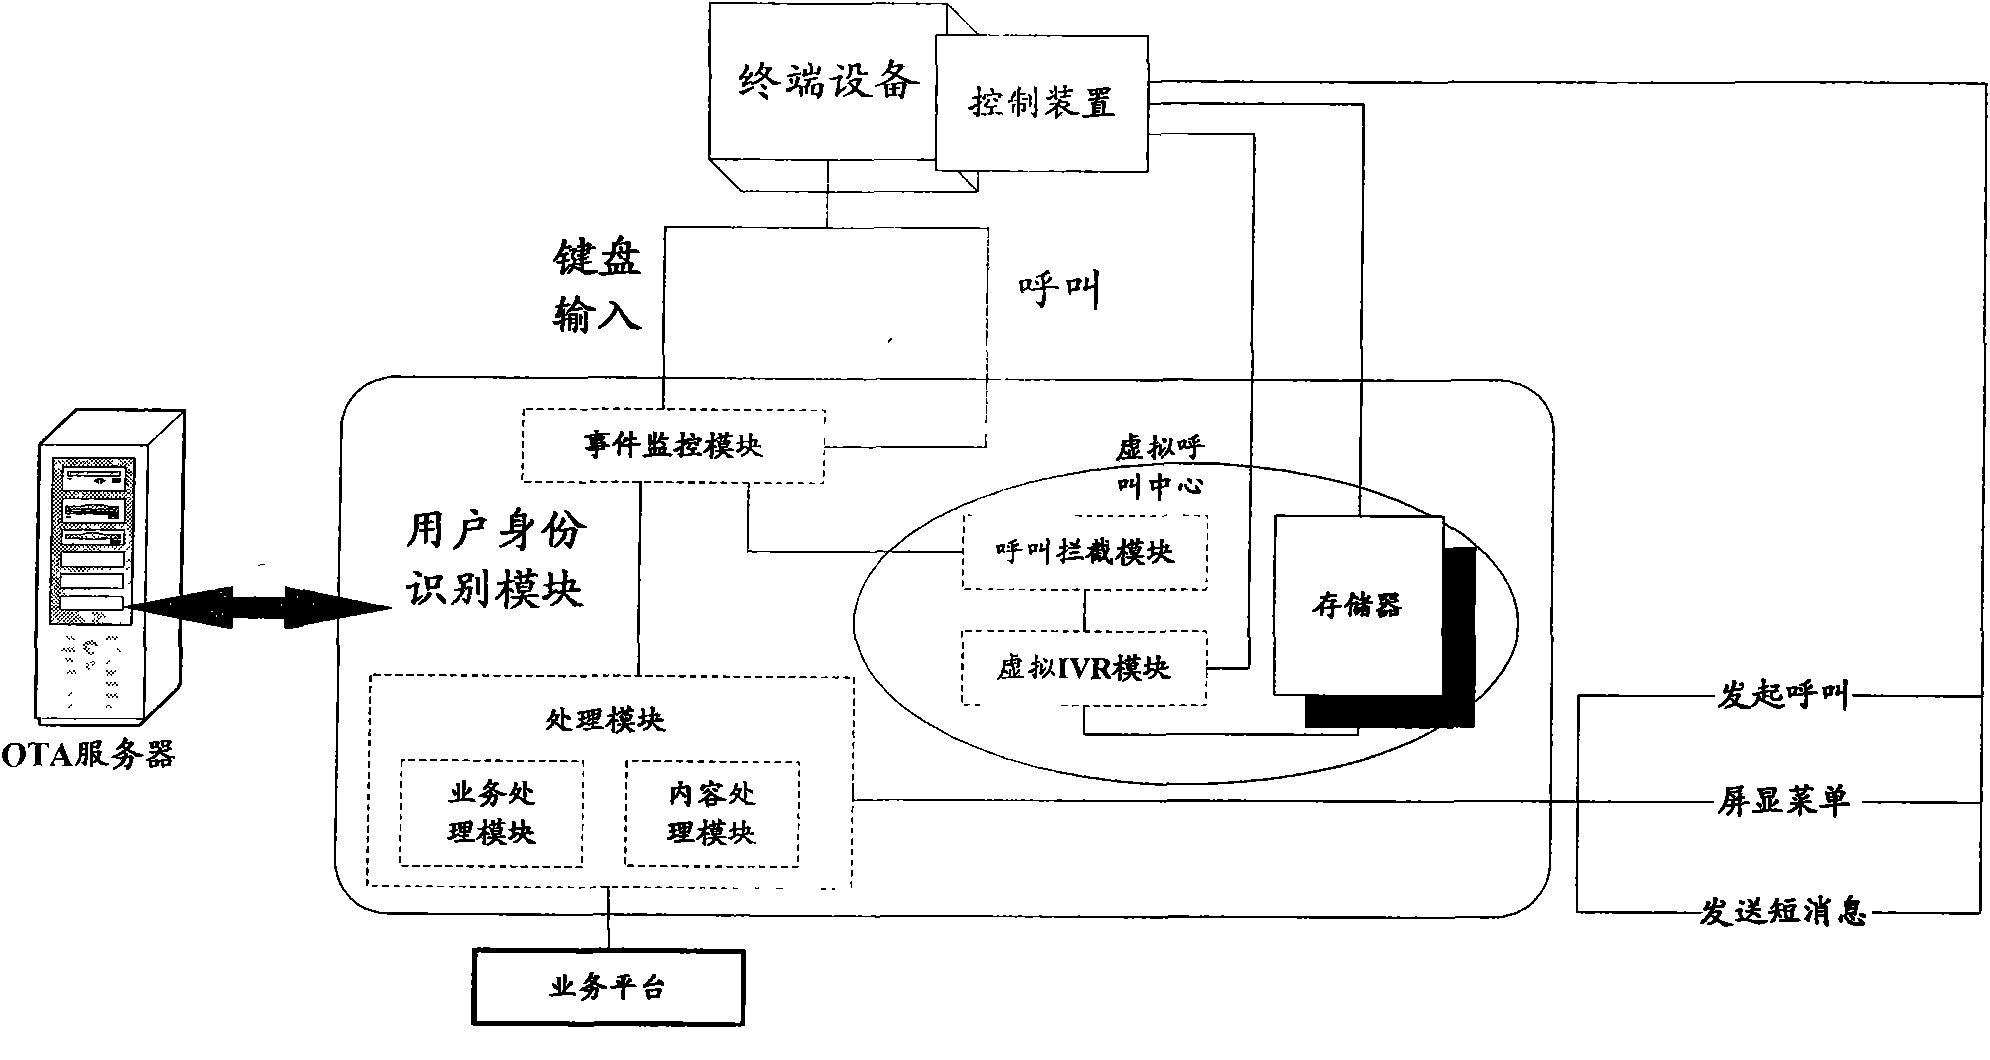 Implementation method for virtual call center, equipment and user identity identification module